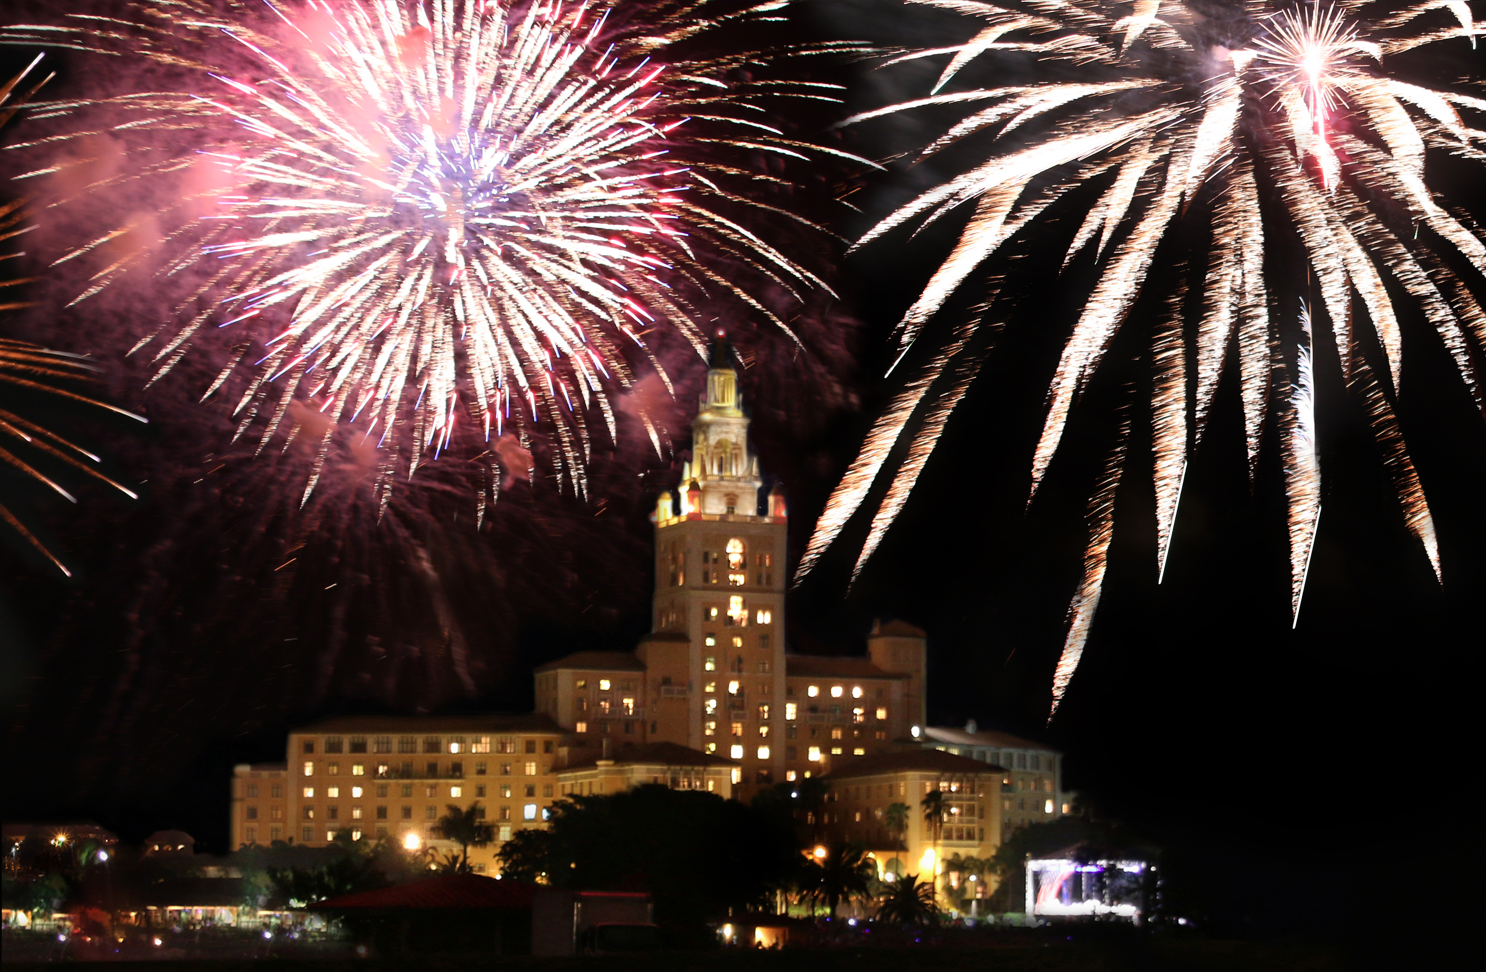 THE CITY OF CORAL GABLES AND THE BILTMORE ARE PLEASED TO ANNOUNCE THE RETURN OF THE SPECTACULAR 4th OF JULY FIREWORKS CELEBRATION AT THE ICONIC BILTMORE HOTEL